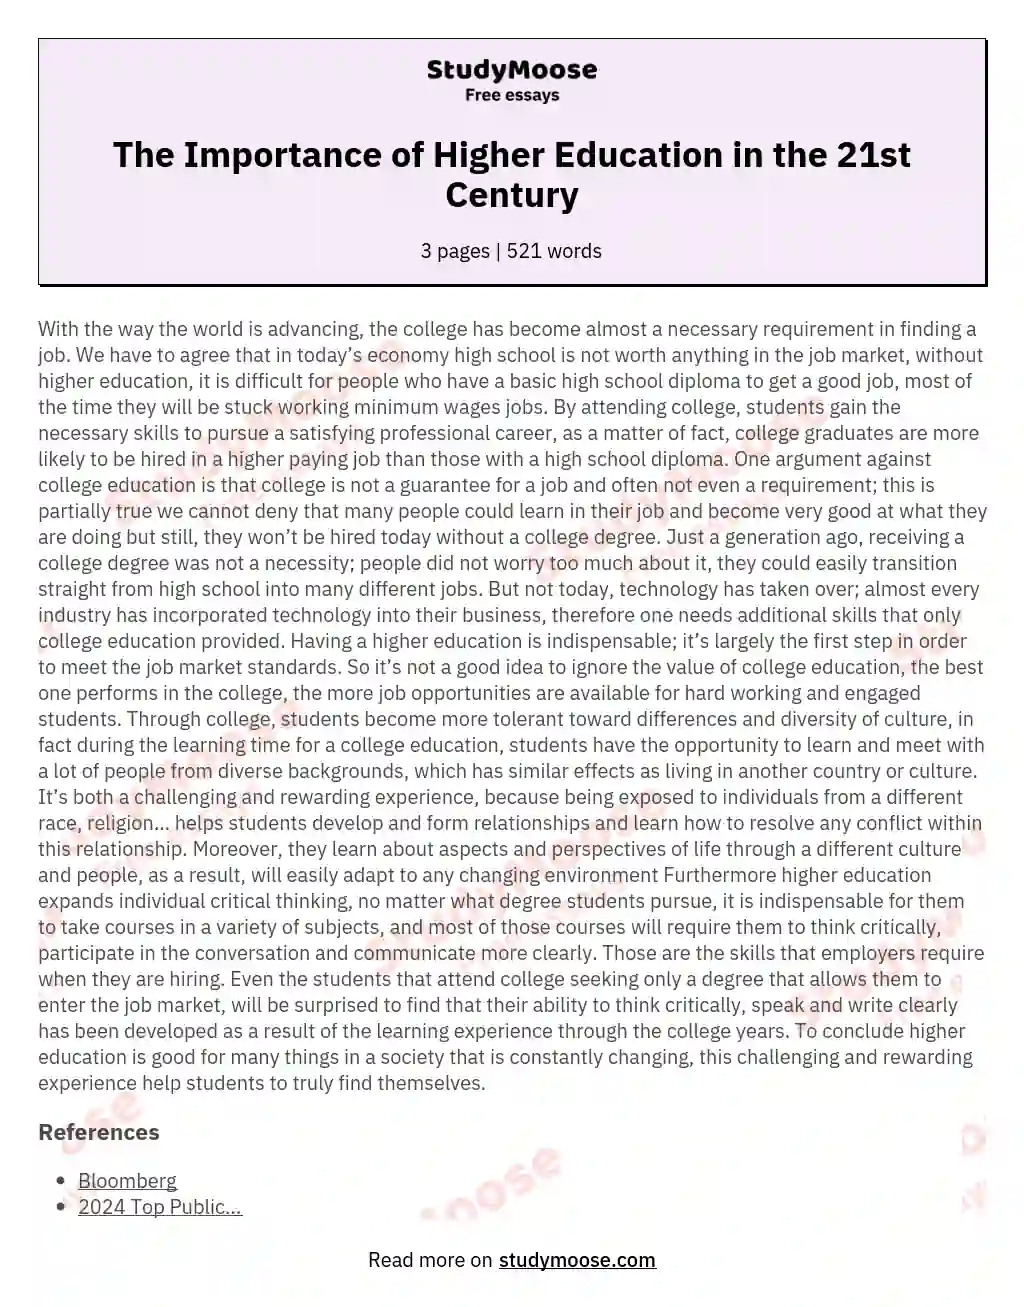 higher education in india in 21st century essay